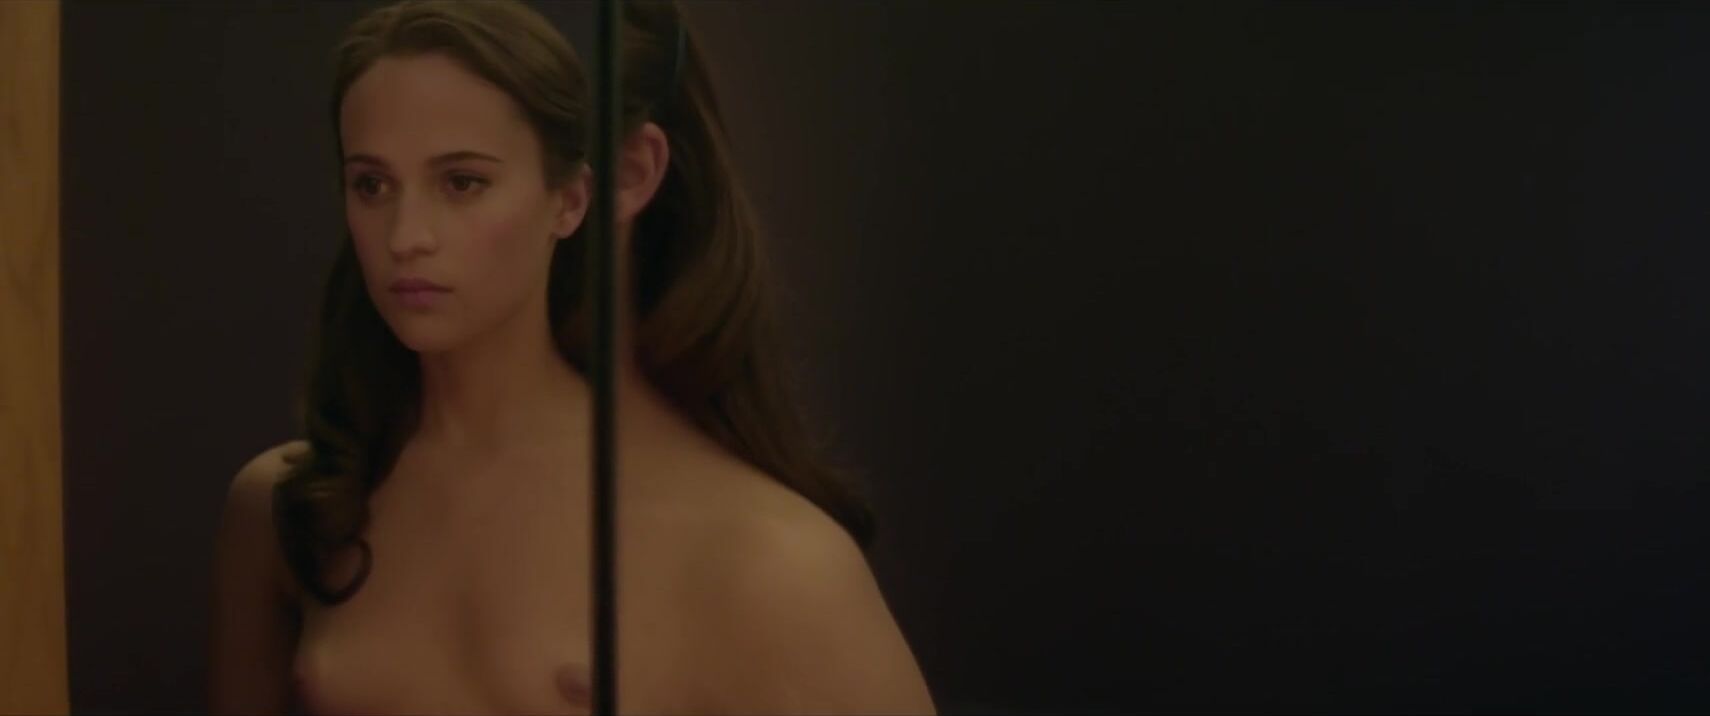 Rule34 Naked Alicia Vikander loves being sexy in feature film moment from Ex Machina (2015) Desperate